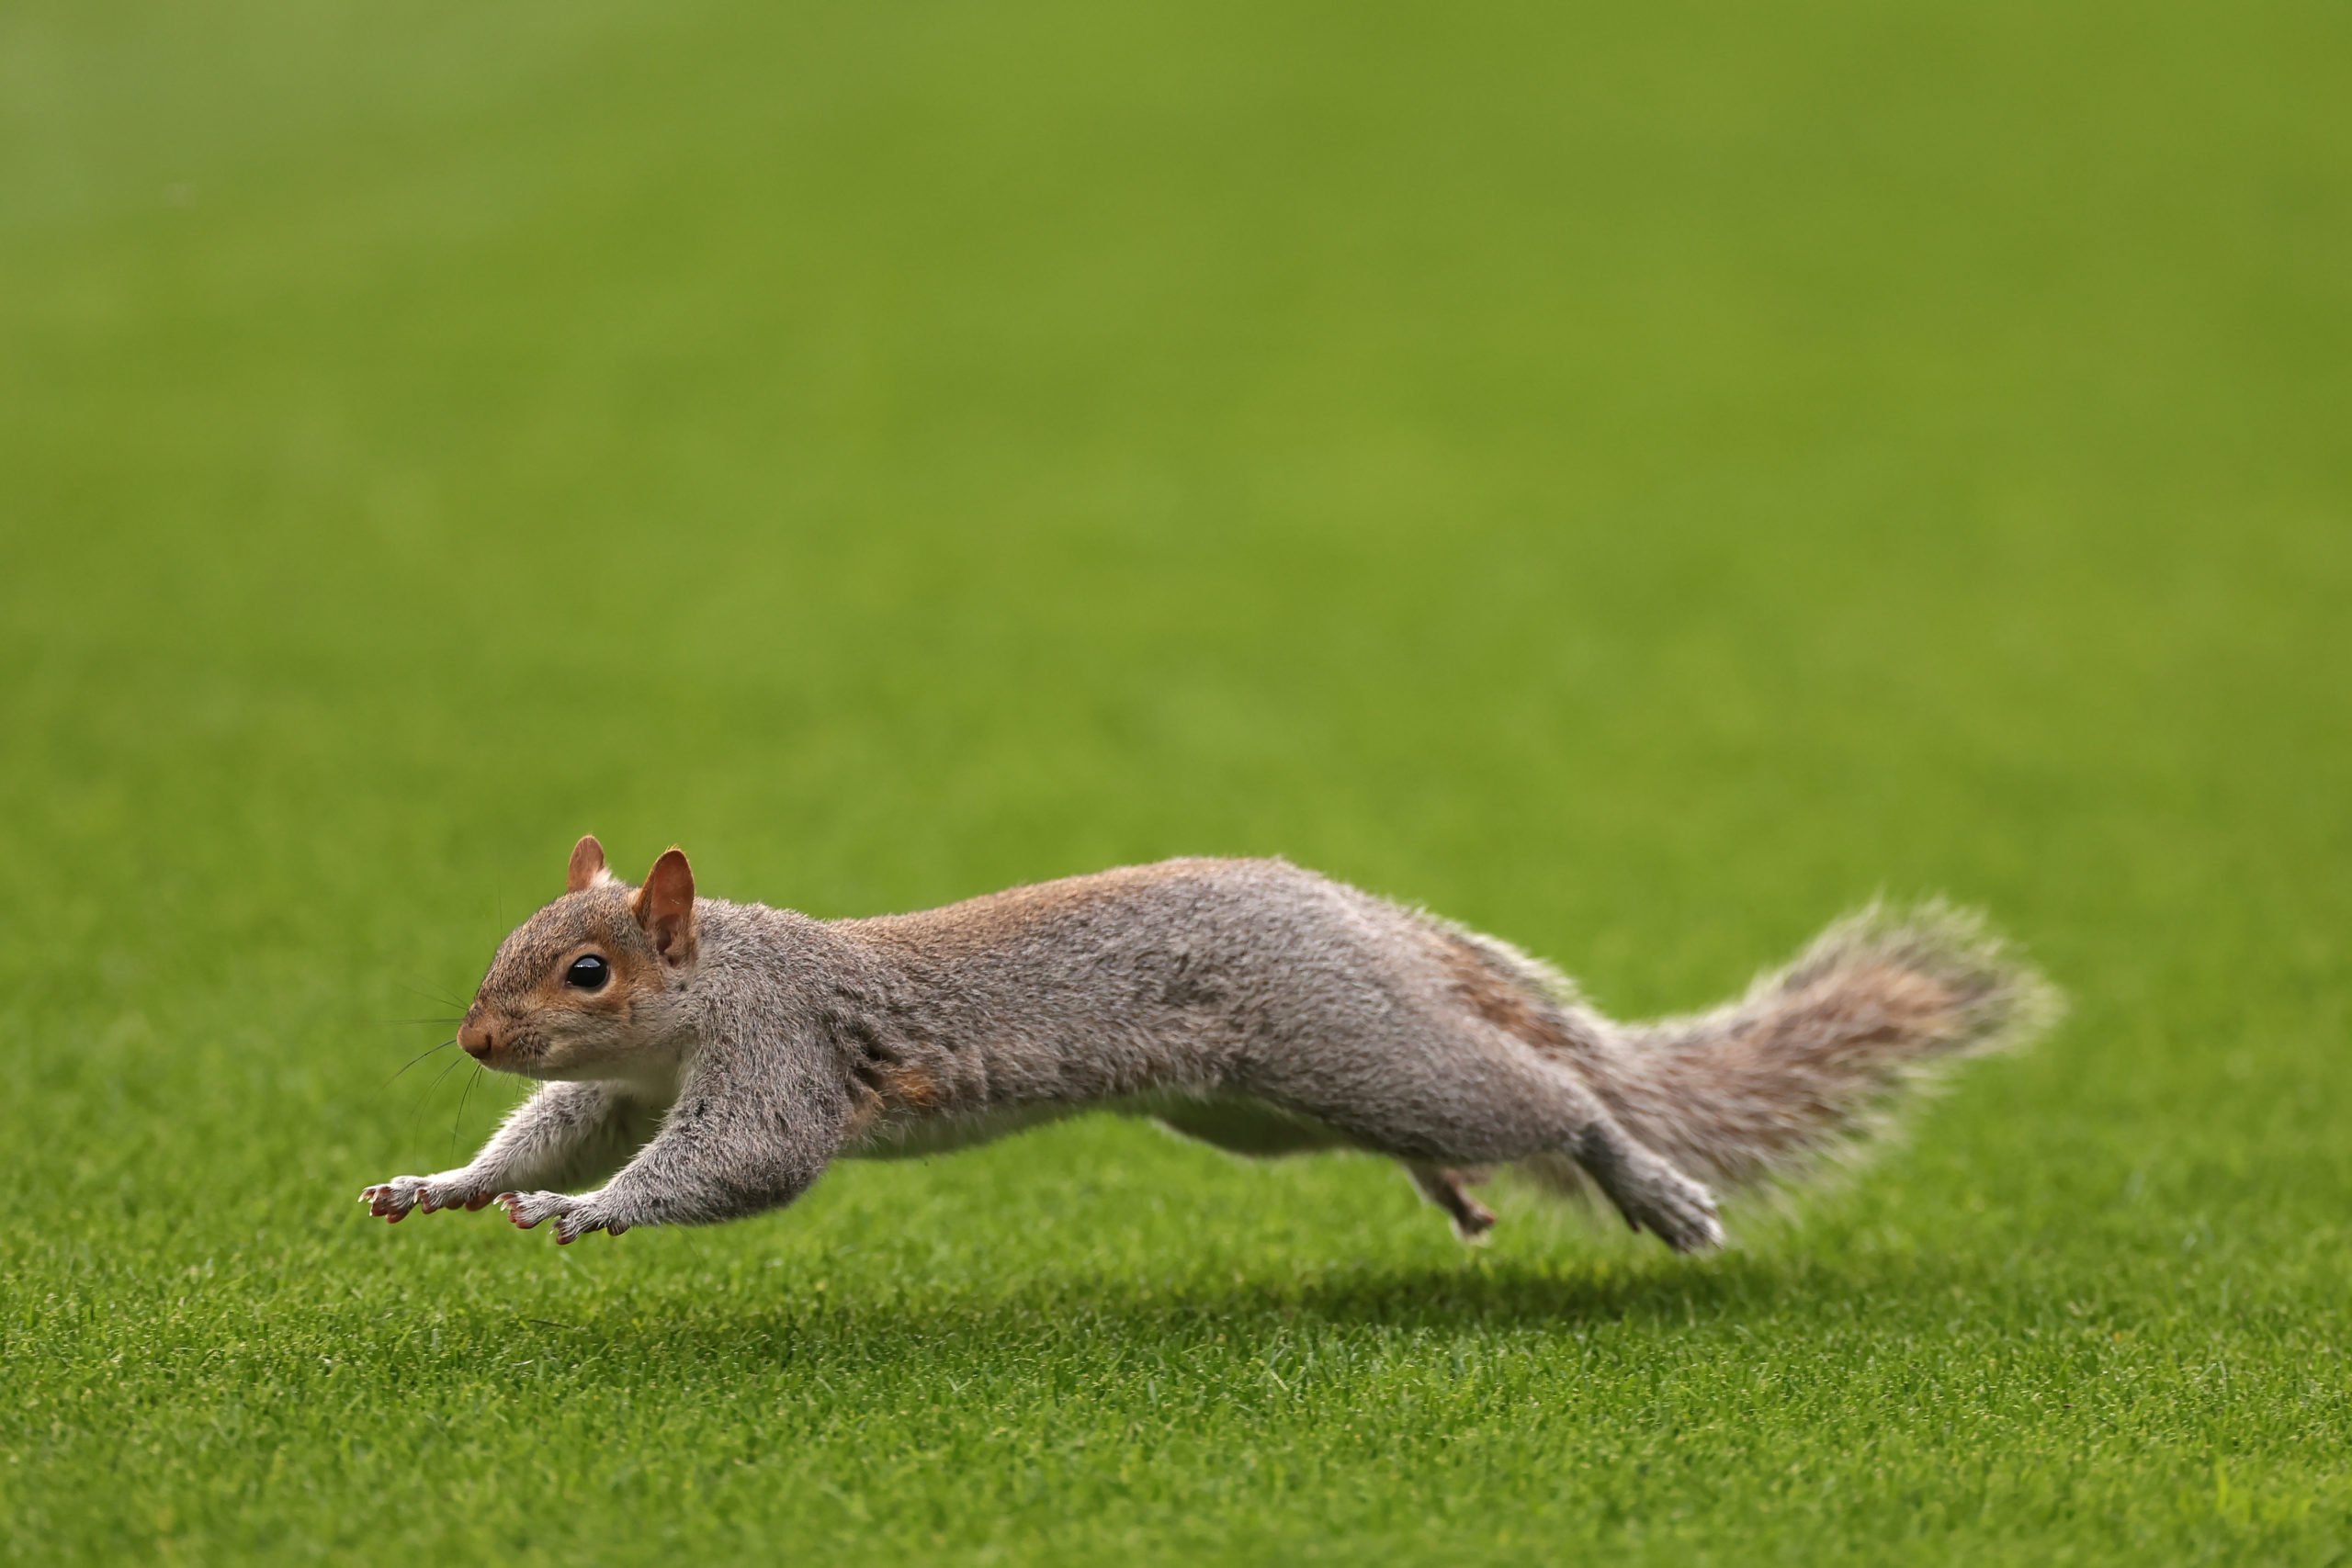 TURIN, ITALY - JANUARY 07: A squirrel pictured on the field of play during the warm up prior to the Serie A TIM match between Torino FC and SSC Napoli at Stadio Olimpico di Torino on January 07, 2024 in Turin, Italy. (Photo by Jonathan Moscrop/Getty Images)